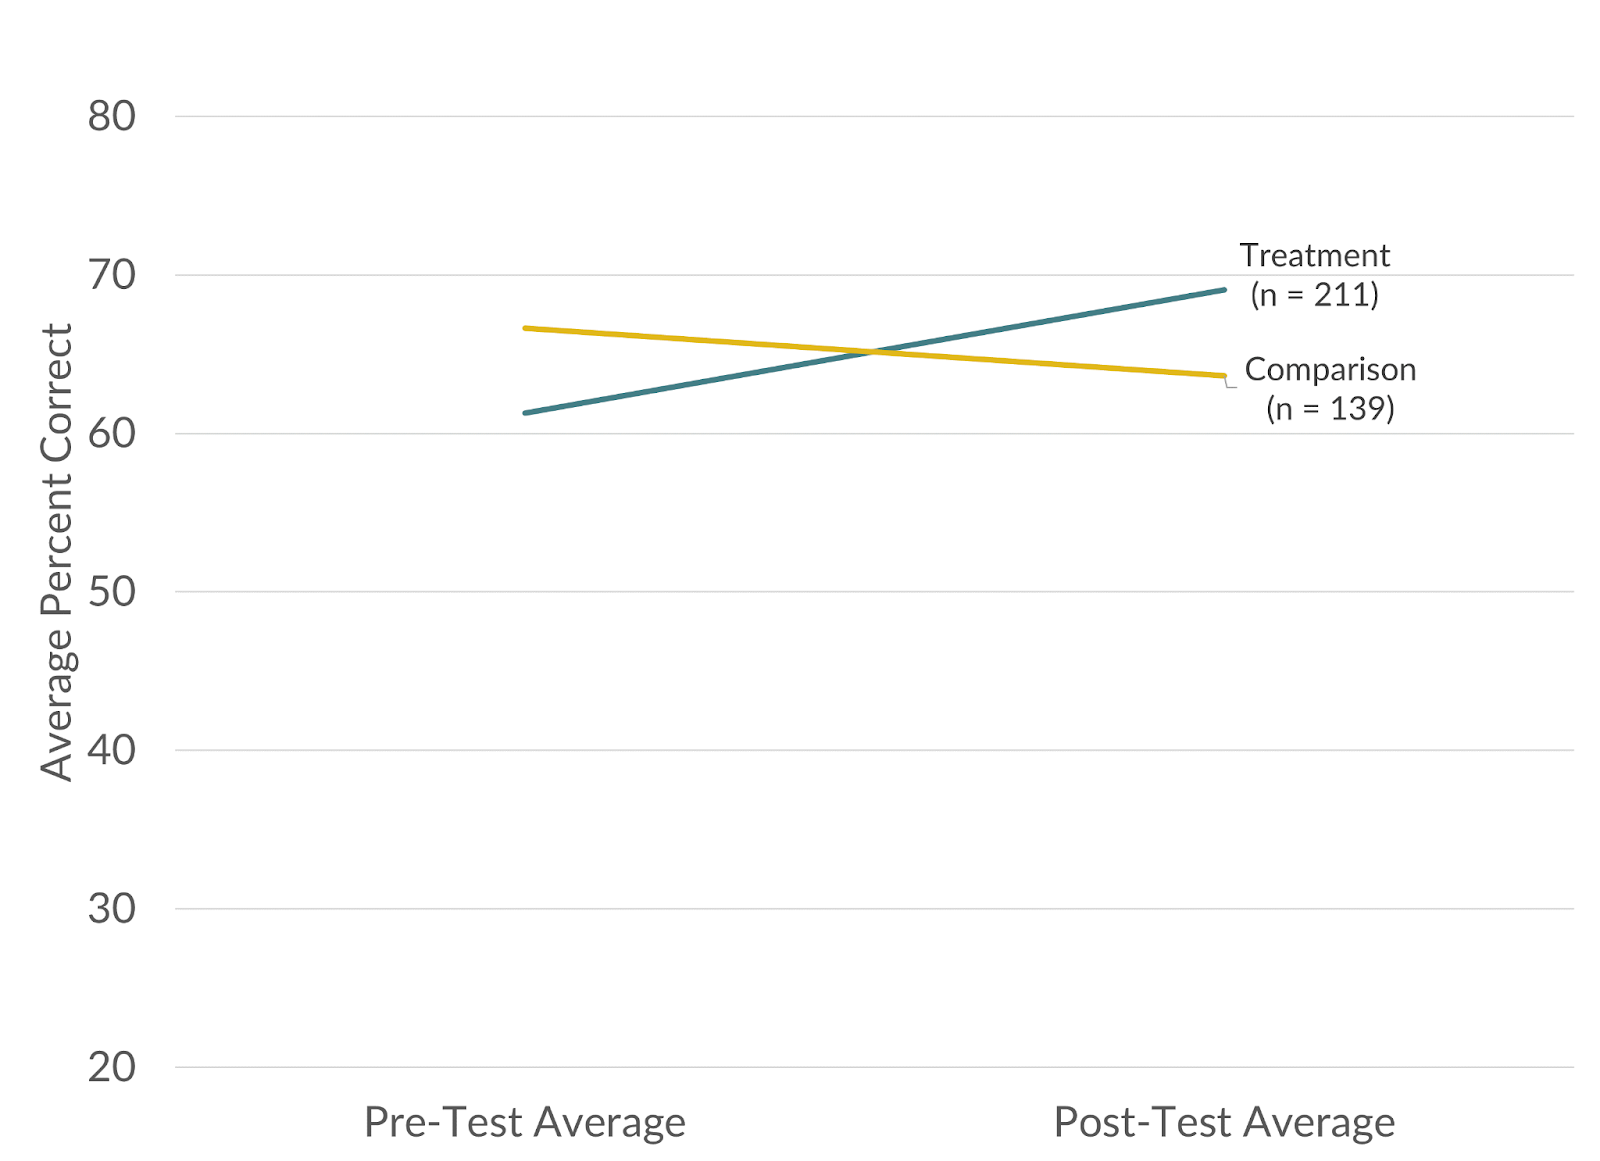 Reading comprehension of students in the treatment group was lower than that of students in the comparison group on pre-test and higher than that of the comparison group on post-test.